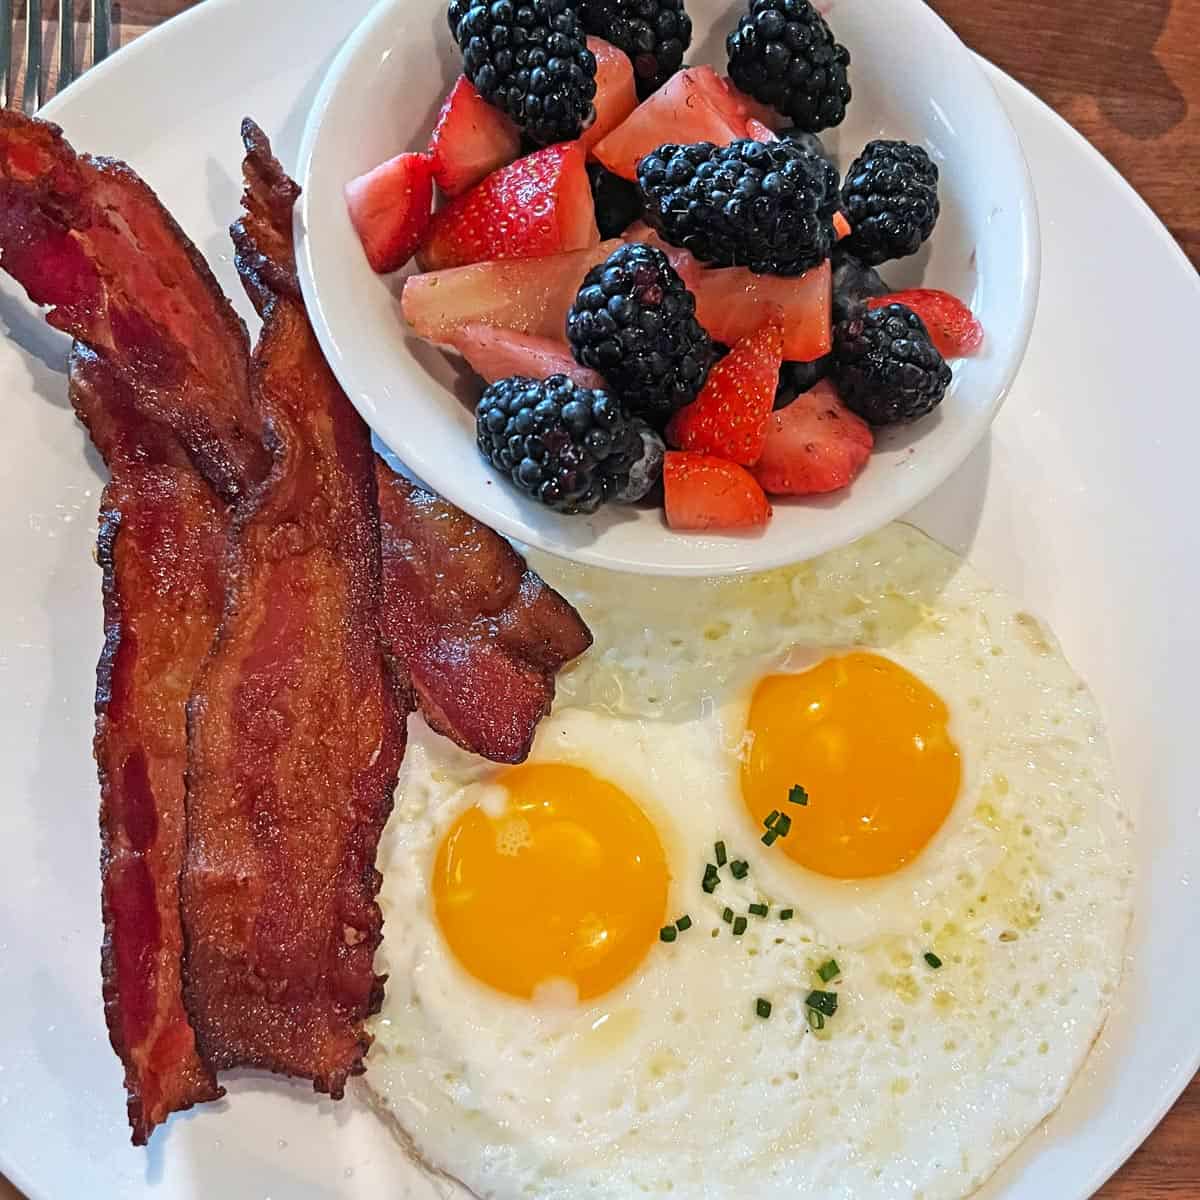 Bacon is served with fried eggs and berries.